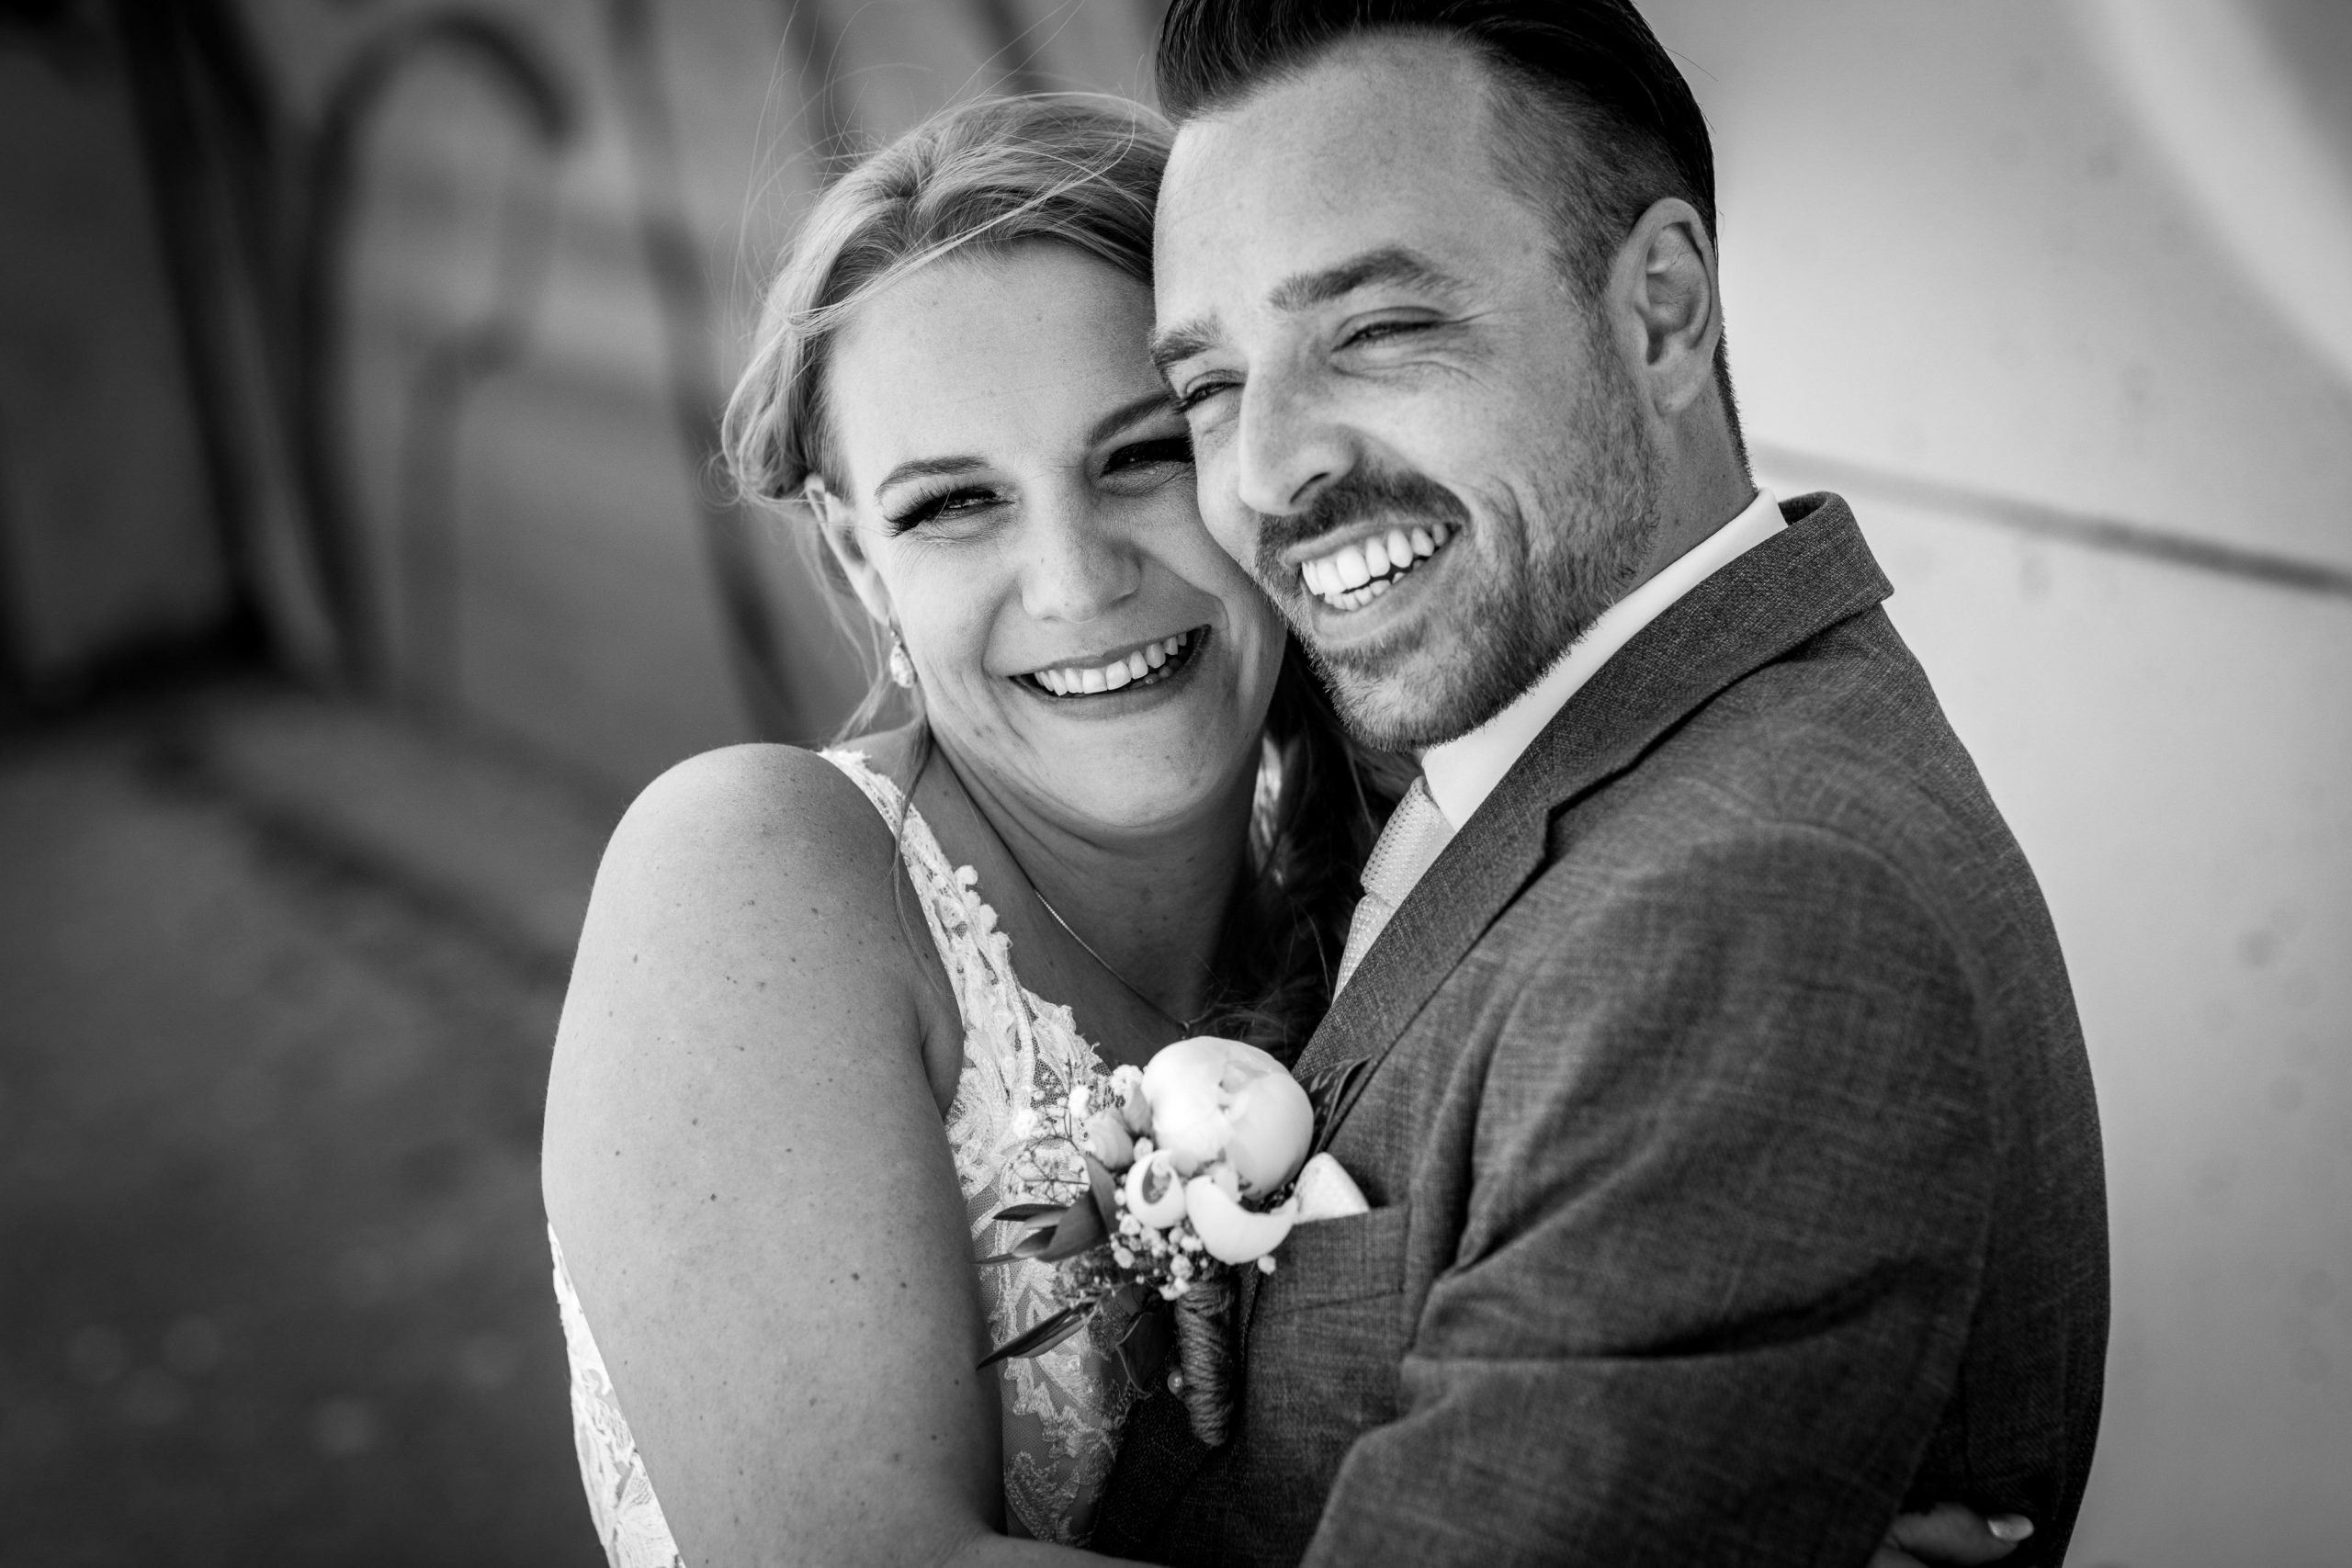 bride and groom portrait black_white image natural unposed candid wedding photography by LGBTQ_friendly documentary wedding photographer surrey sussex